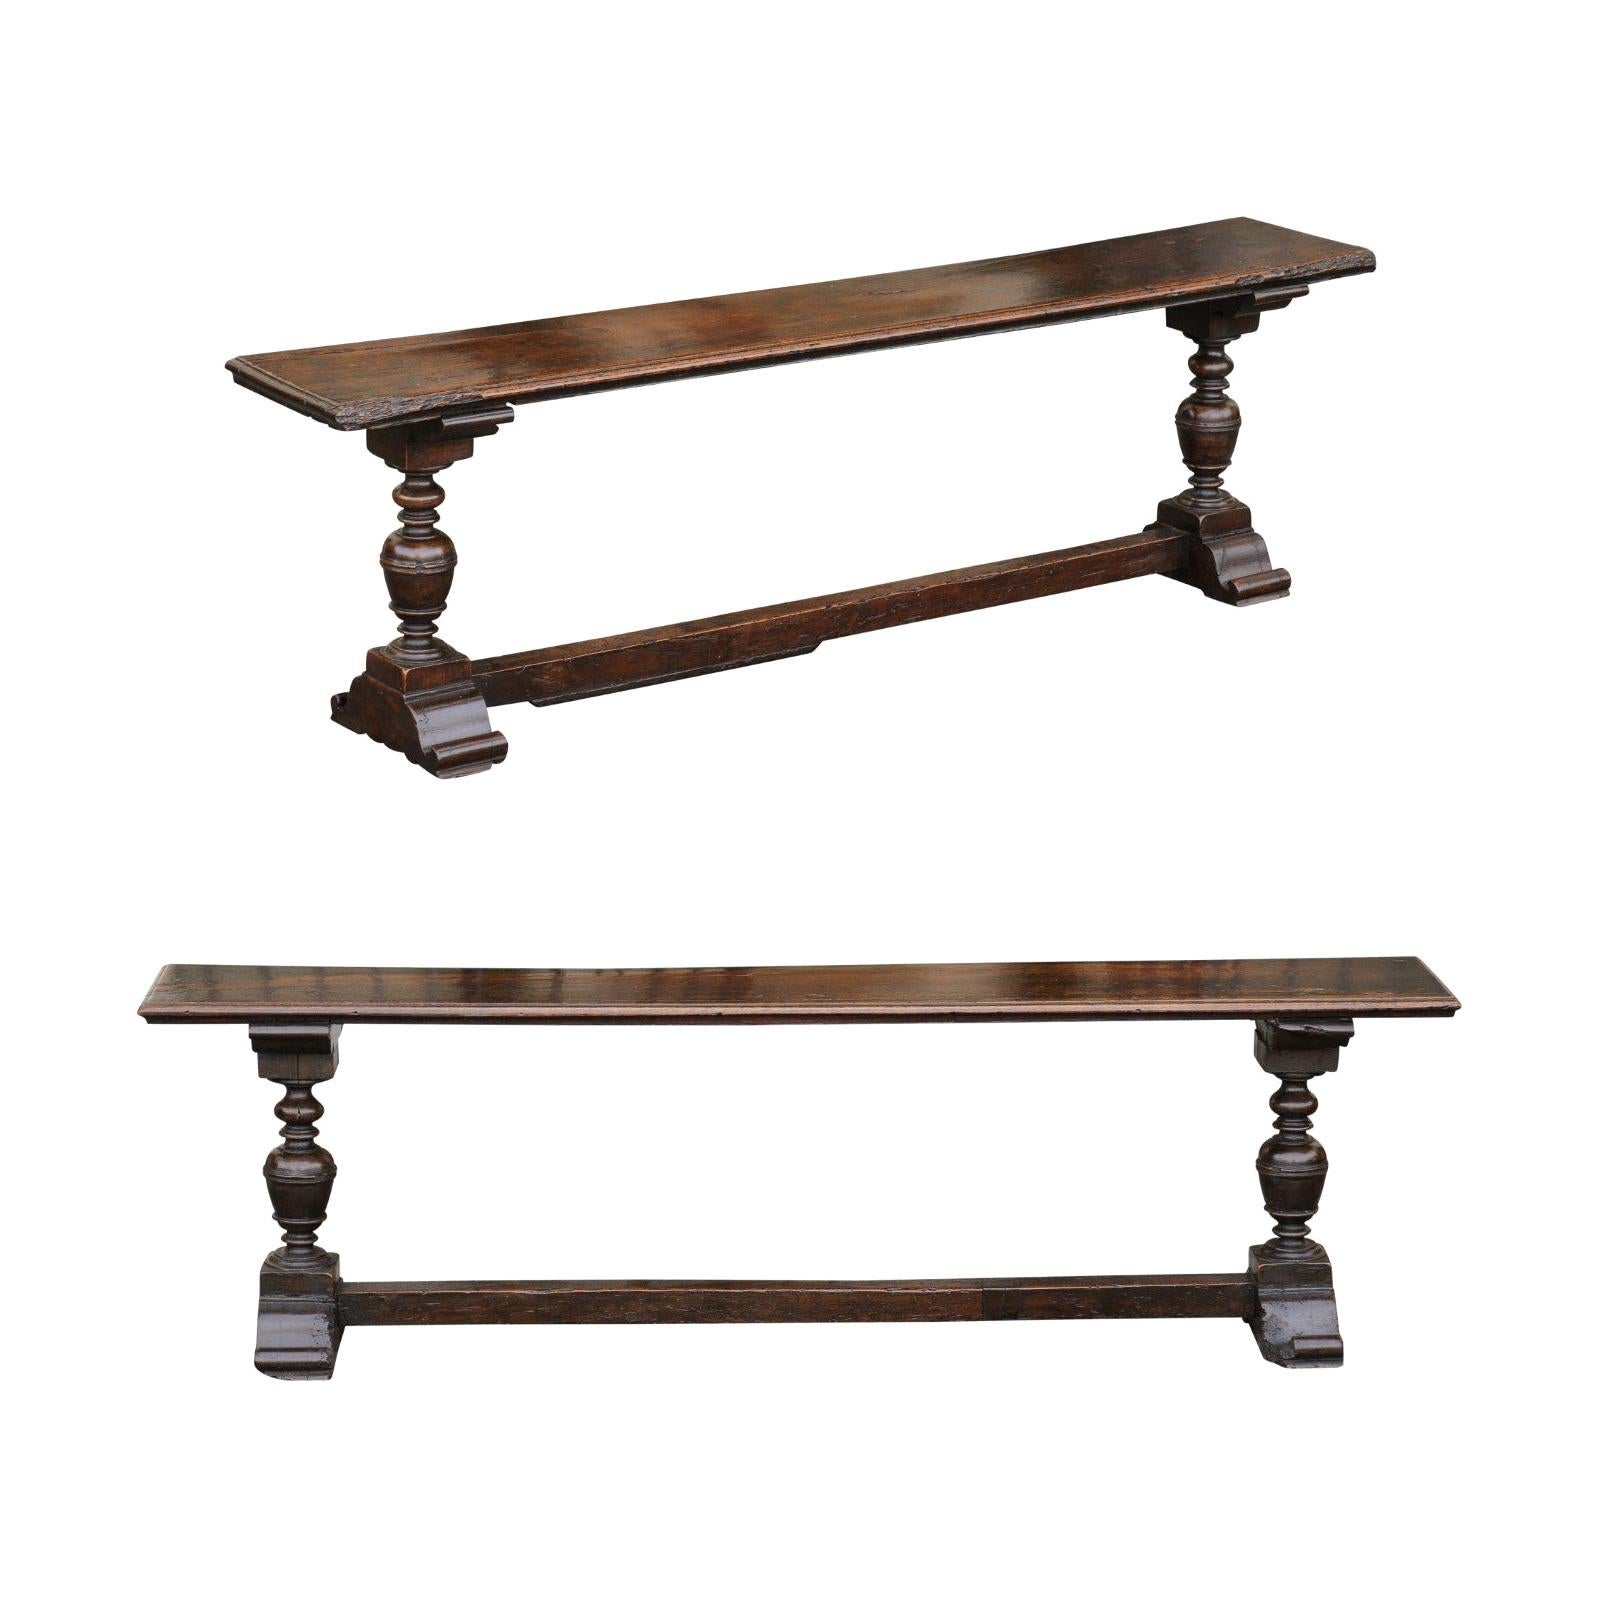 Two English Georgian Period Walnut Benches with Turned Legs and Cross Stretcher